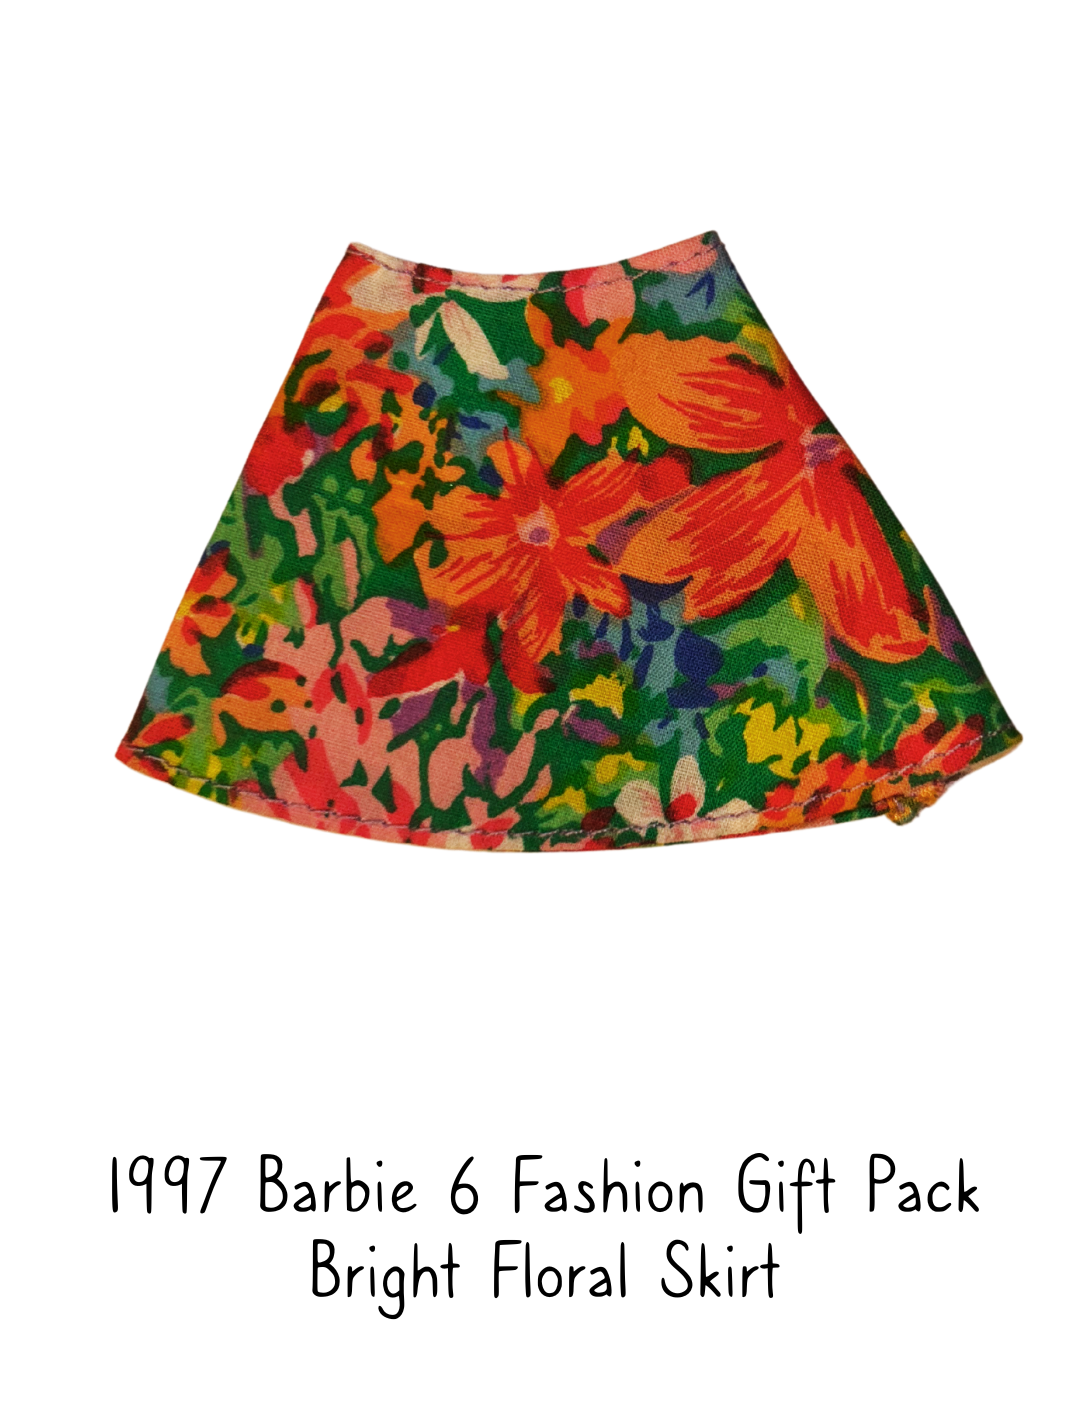 1997 Barbie 6 Complete Fashion Gift Pack Bright Floral Skirt